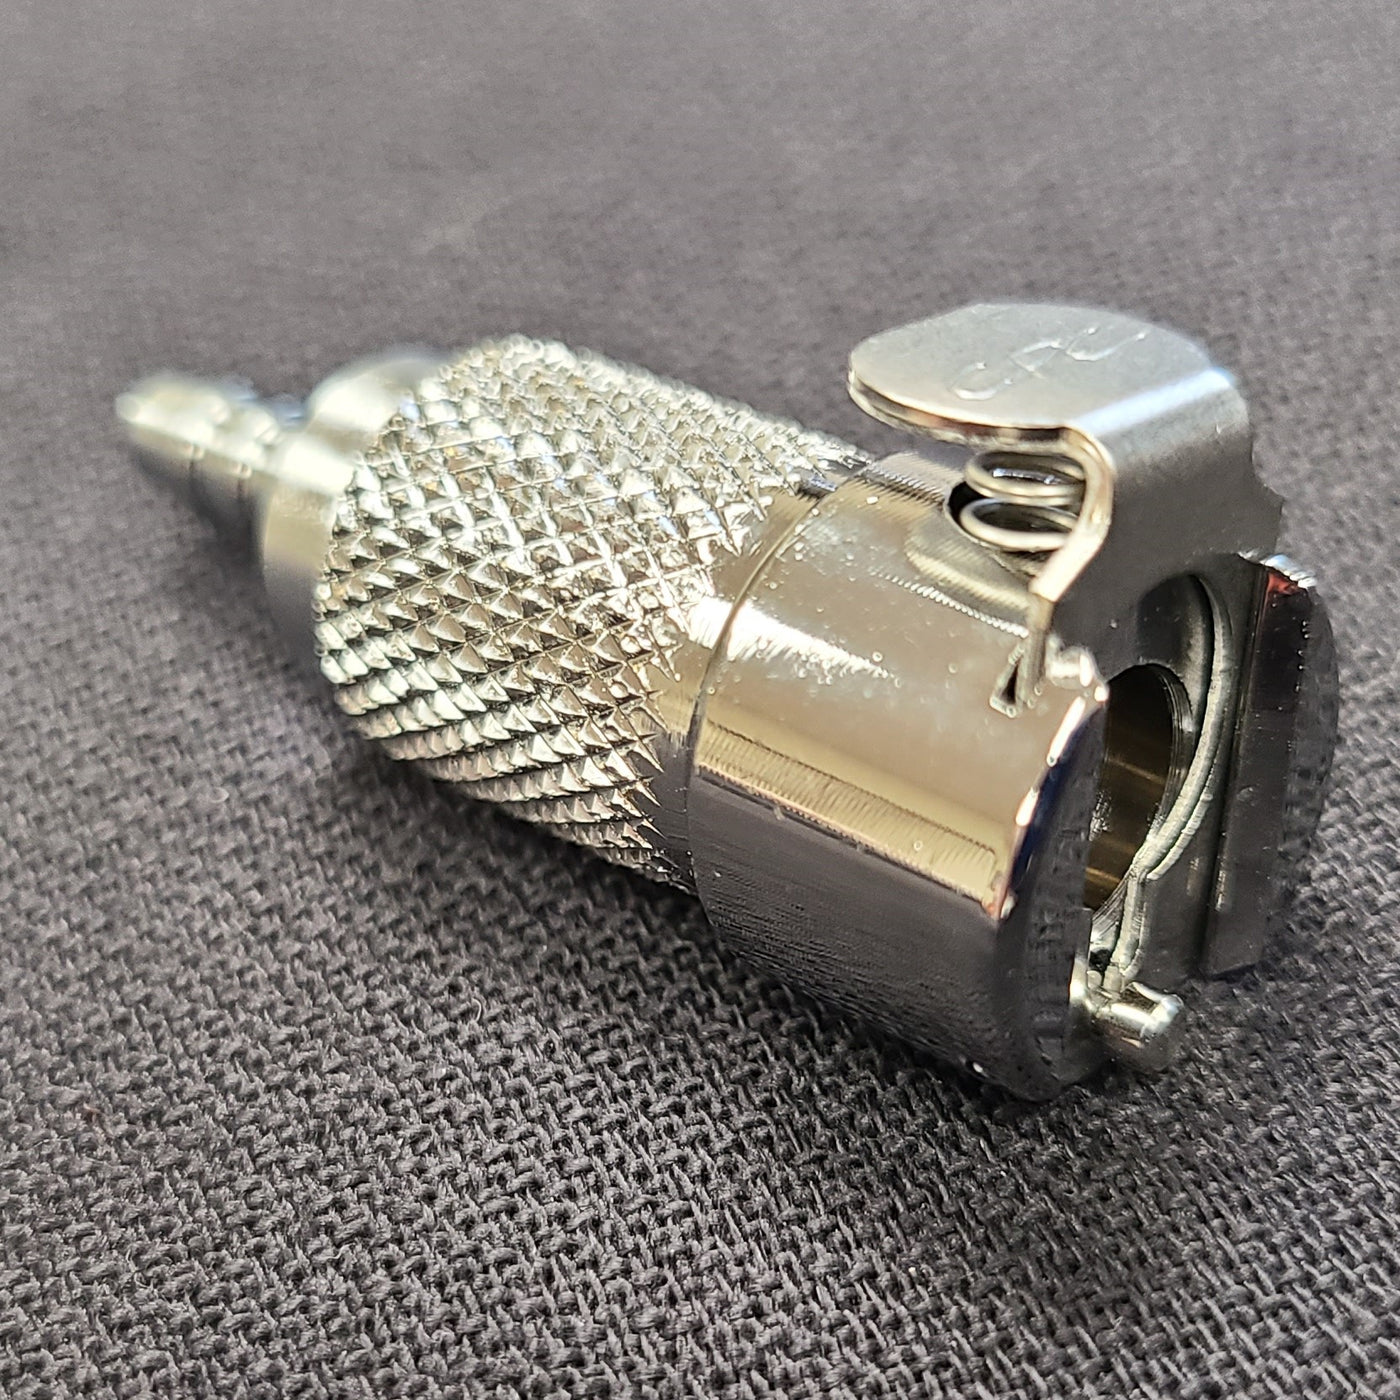 Female Connector - 1/8" barbed metal female connector (no internal valve).